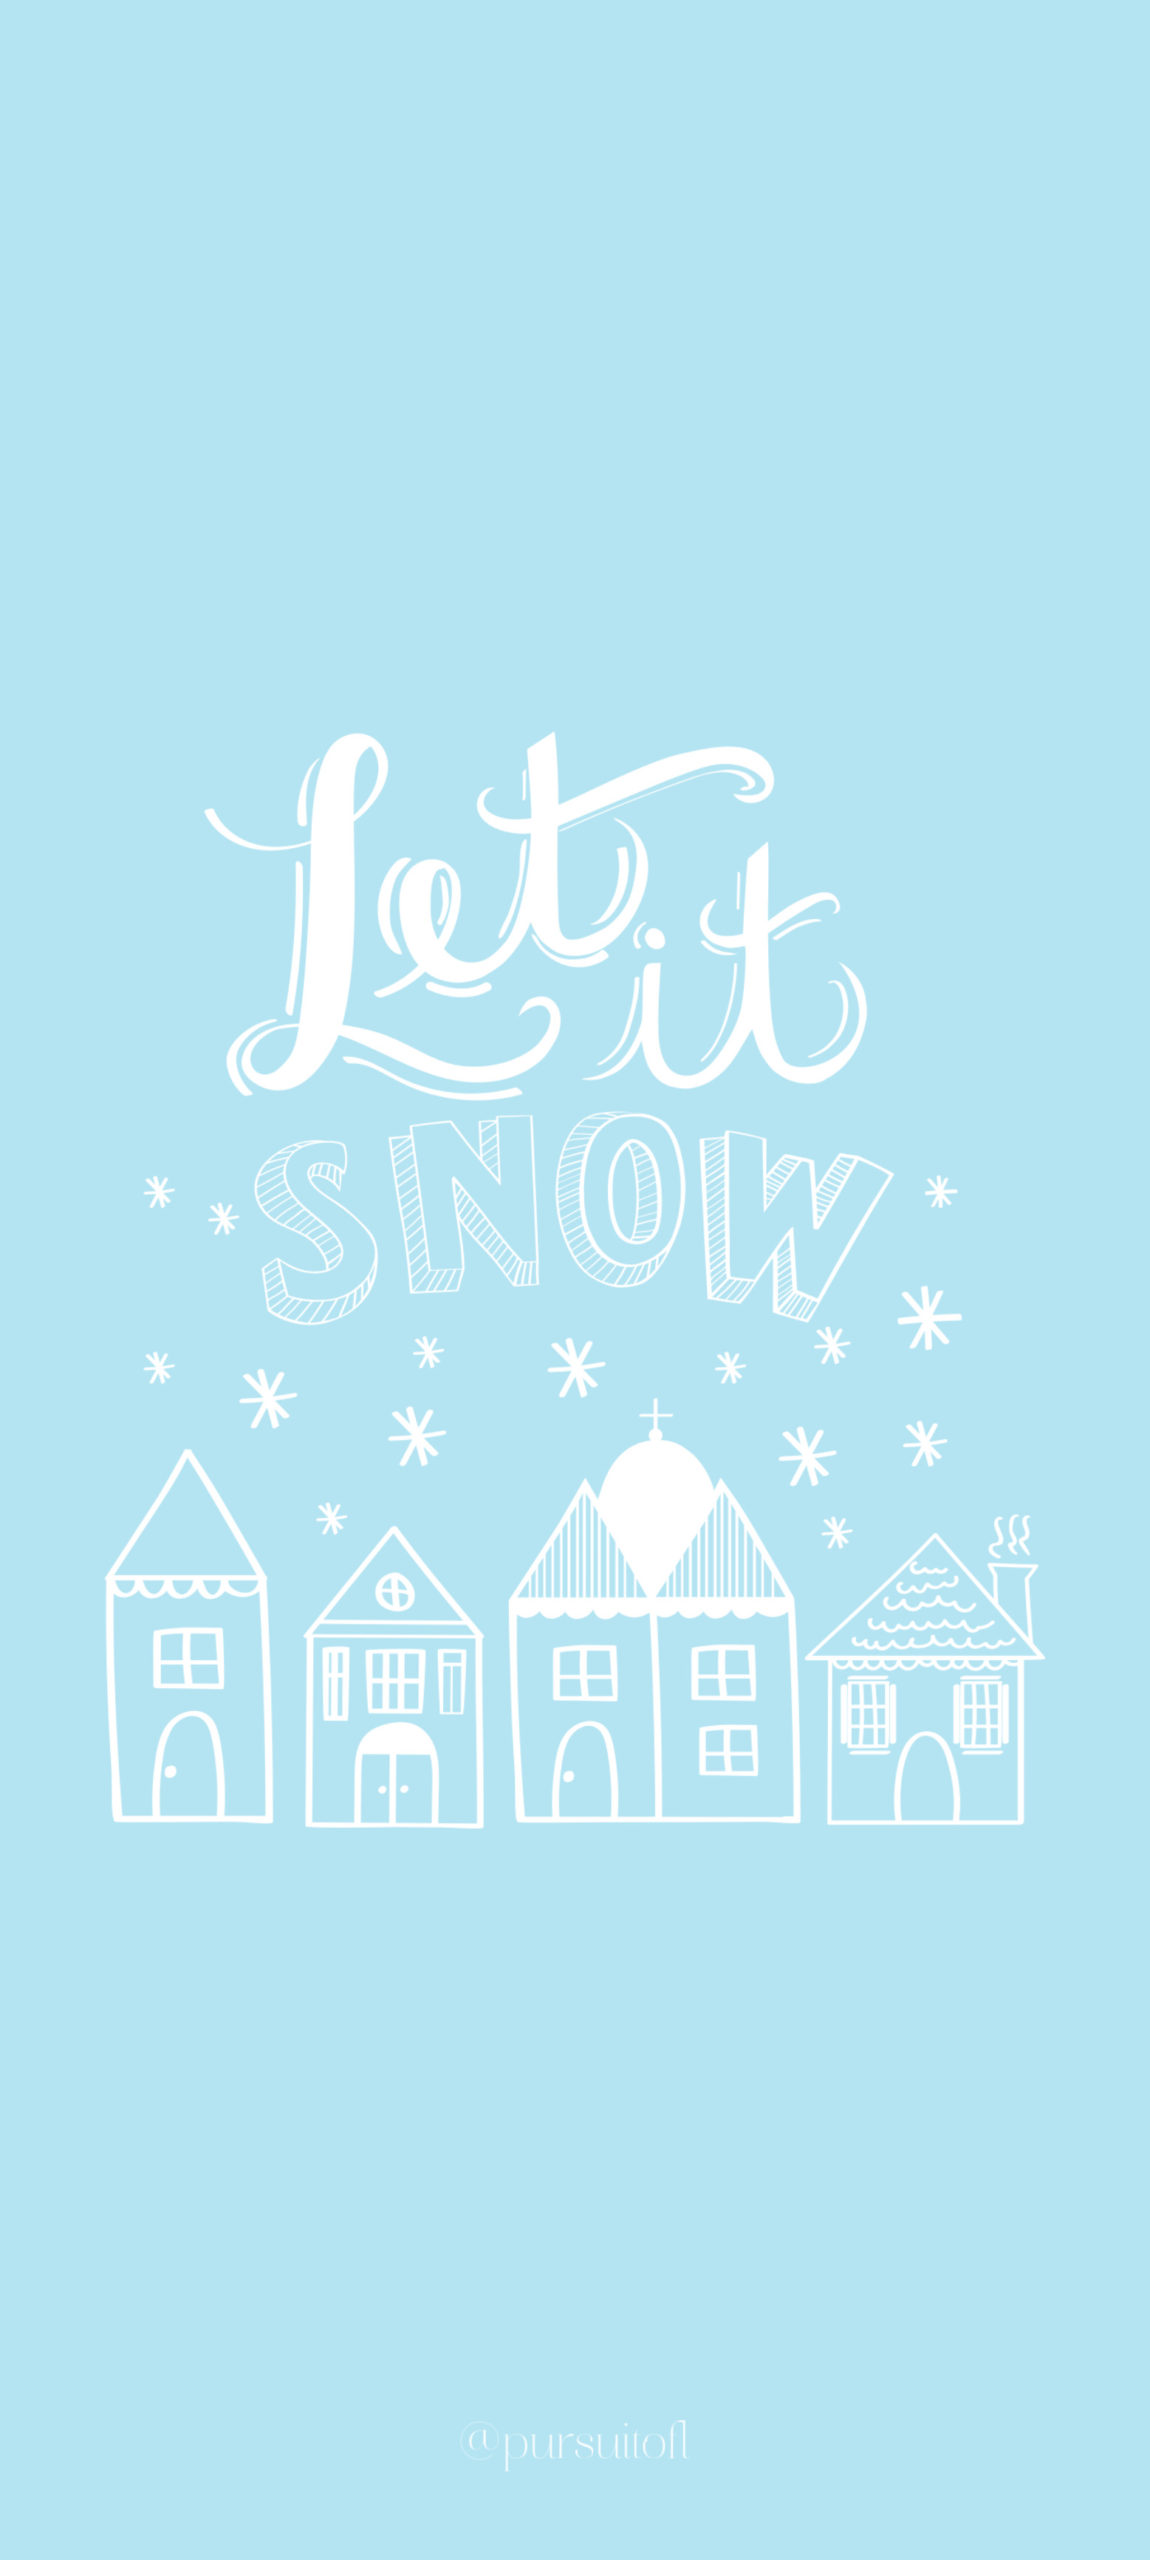 Light Blue Winter Phone Wallpaper with Let it Snow text and village and snow